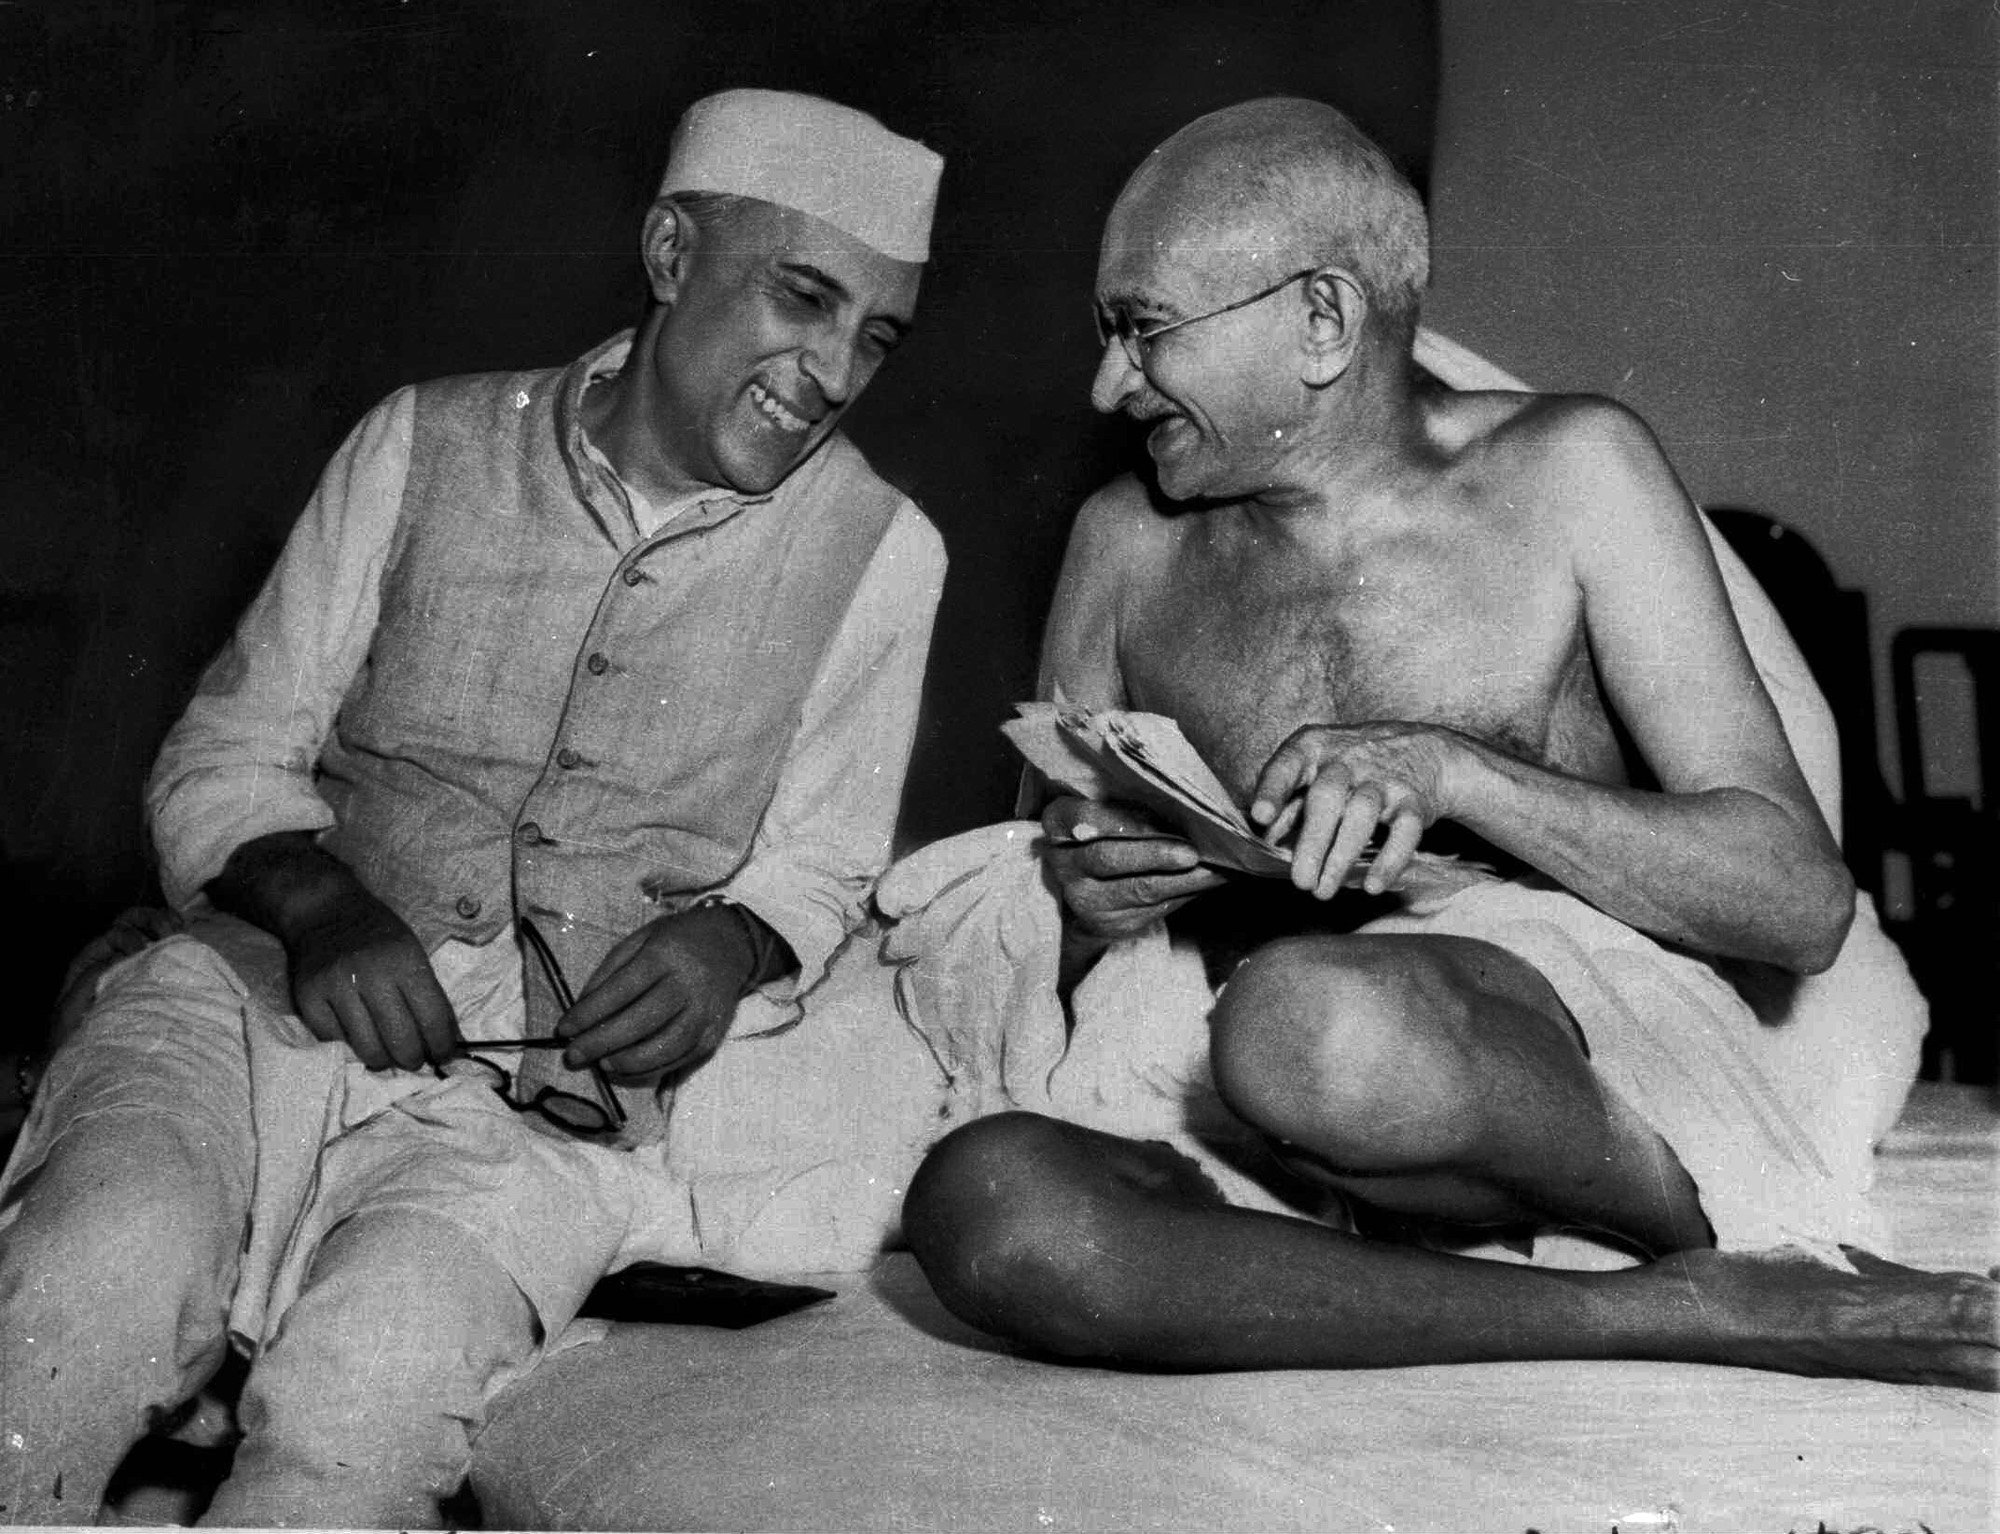 A bespectacled Mohandas Gandhi, the Mahatma, who eventually led India to its independence, laughs with the man who was to be the nation's first prime minister, Jawaharlal Nehru, at the All-India Congress committee meeting in Bombay, India, on July 6, 1946. (AP) 